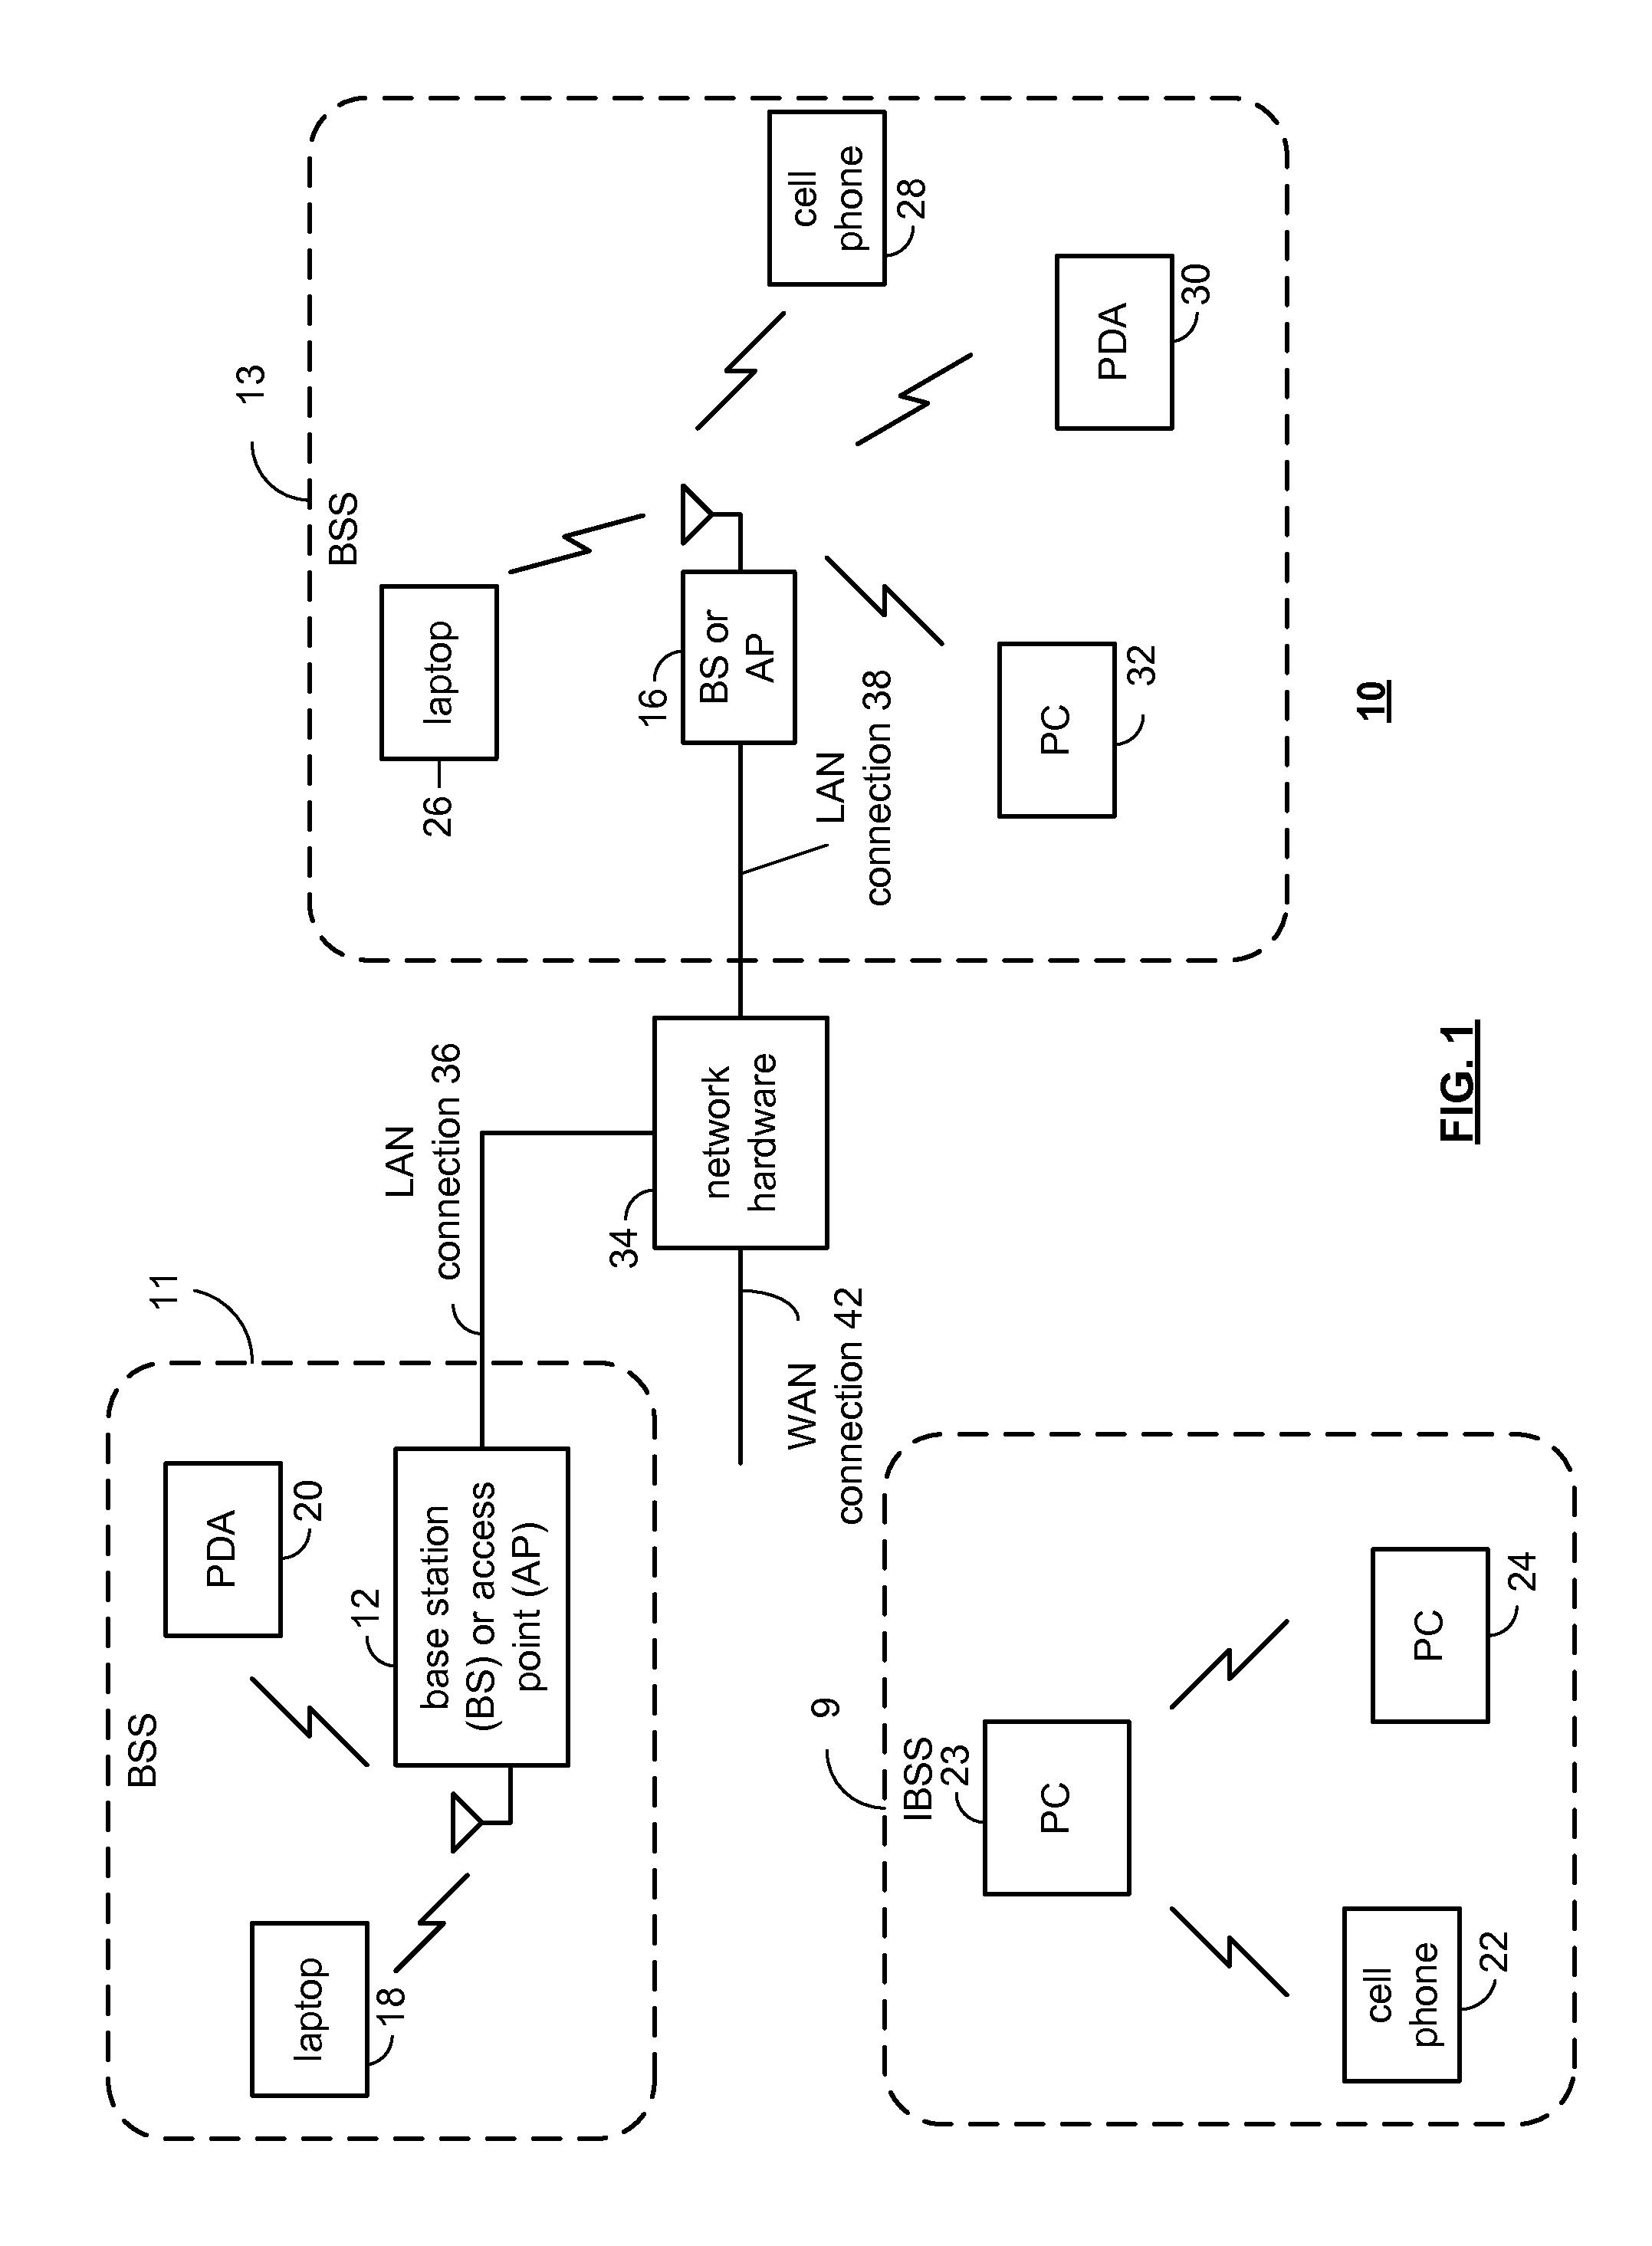 Multiple frequency antenna array for use with an RF transmitter or receiver